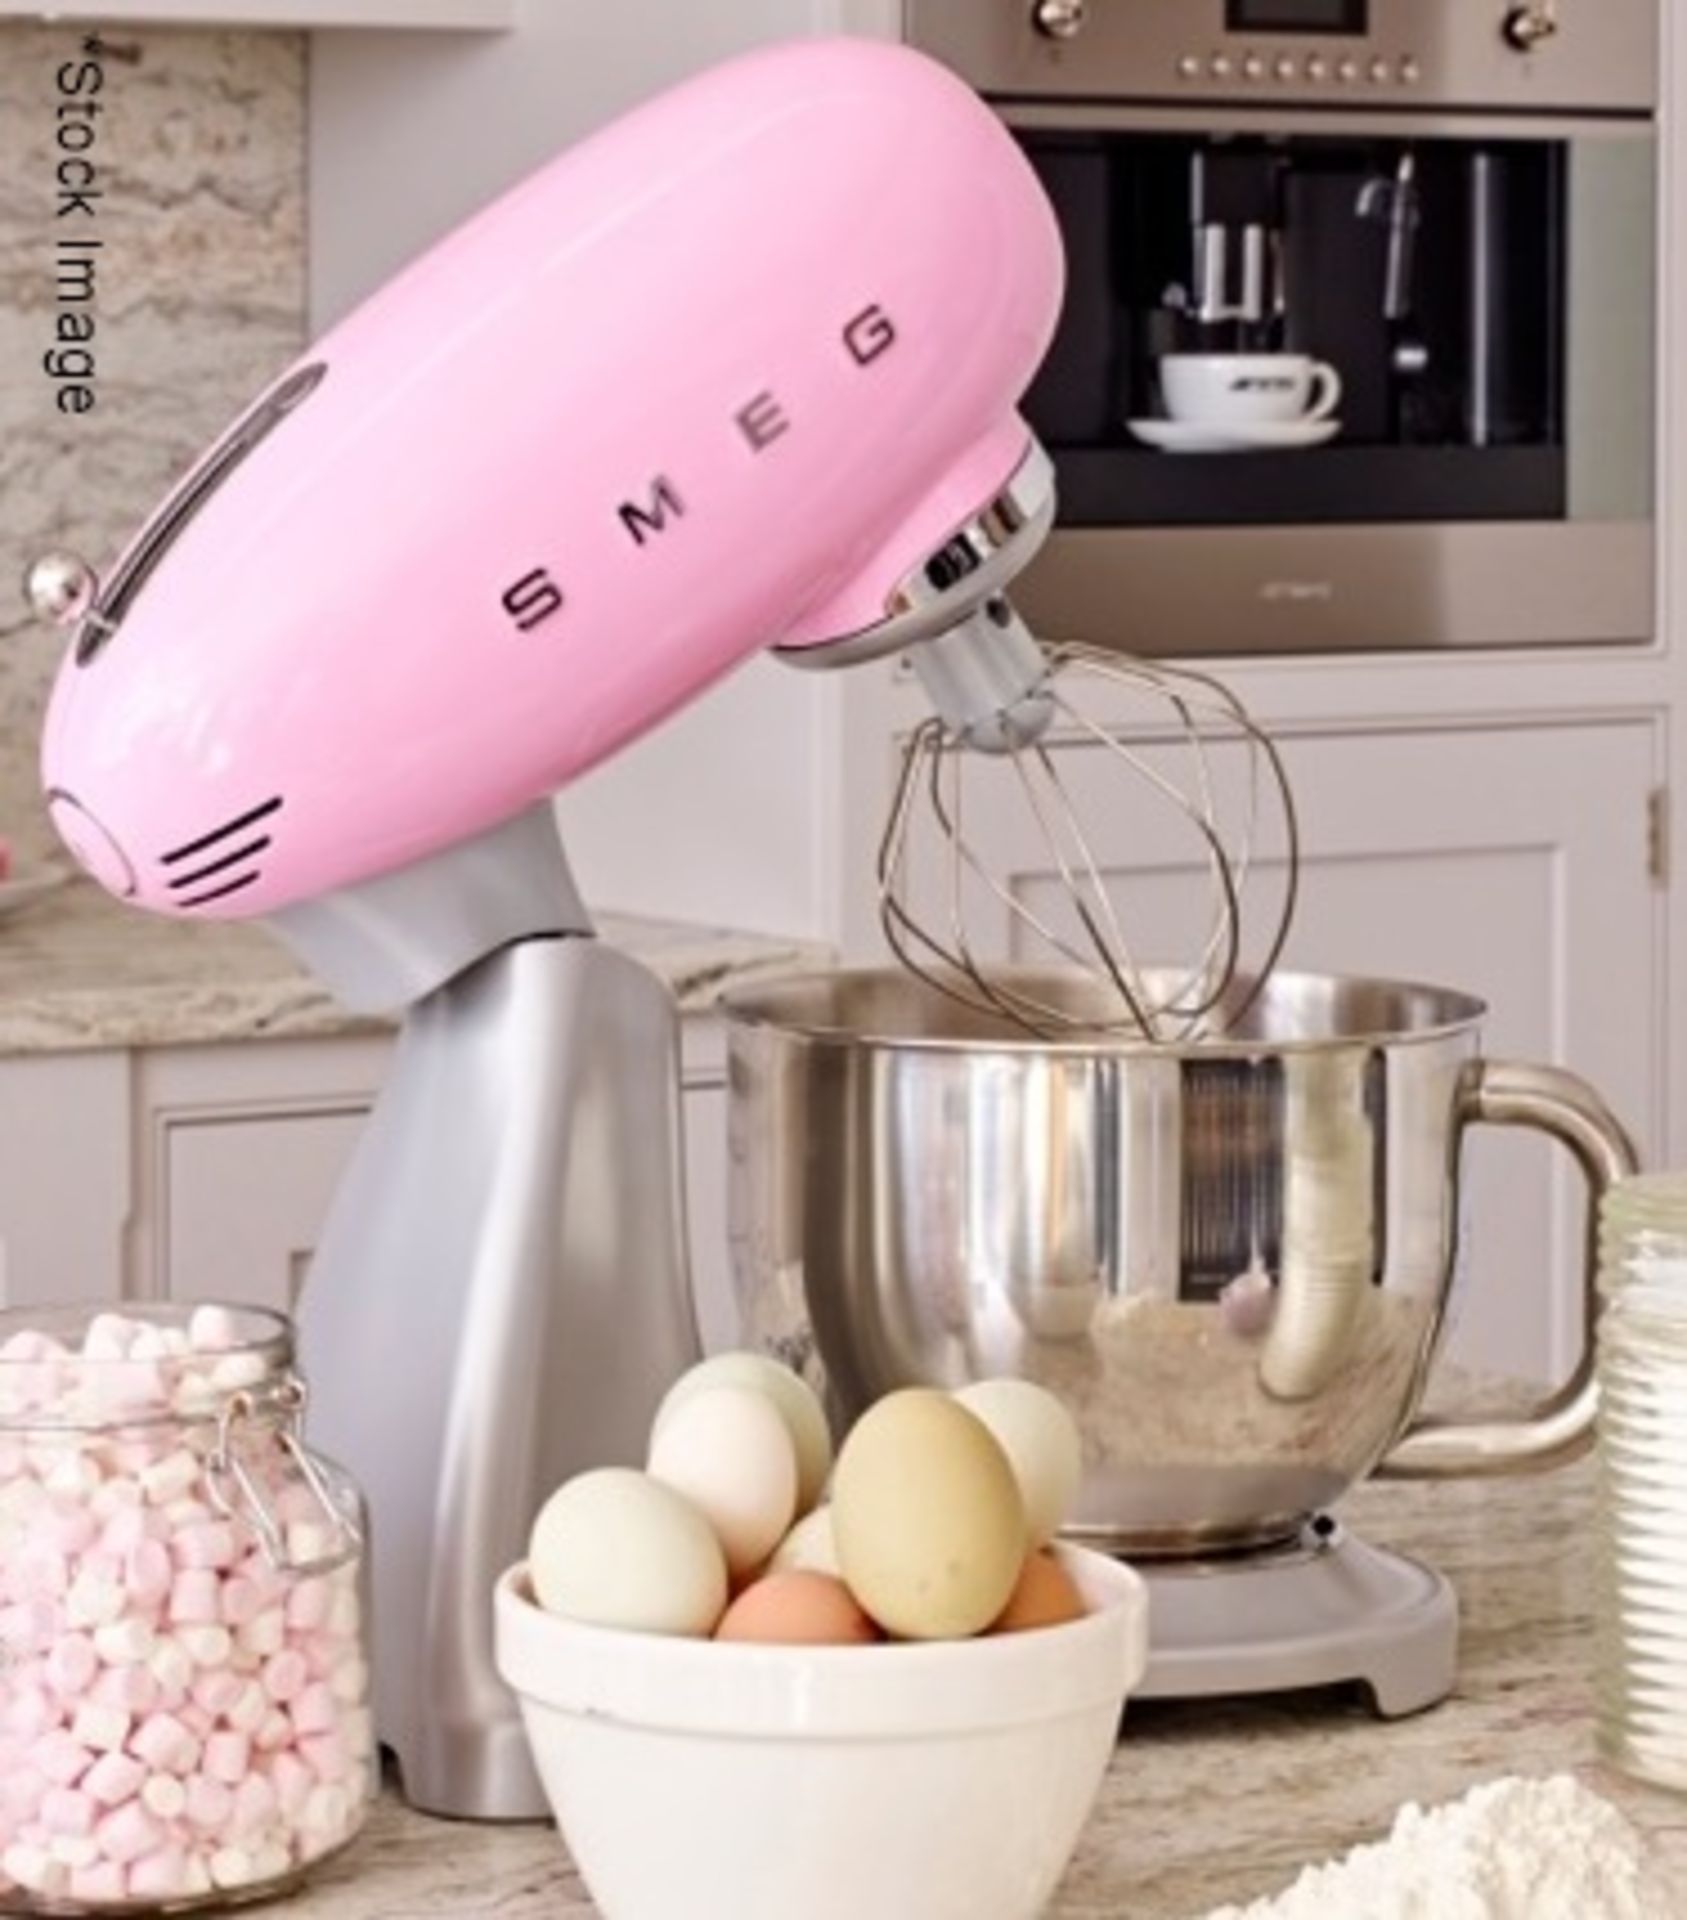 1 x SMEG 50's Retro Stand Mixer In Pink With 4.8 Litre Bowl And Accessories - RRP £499.00